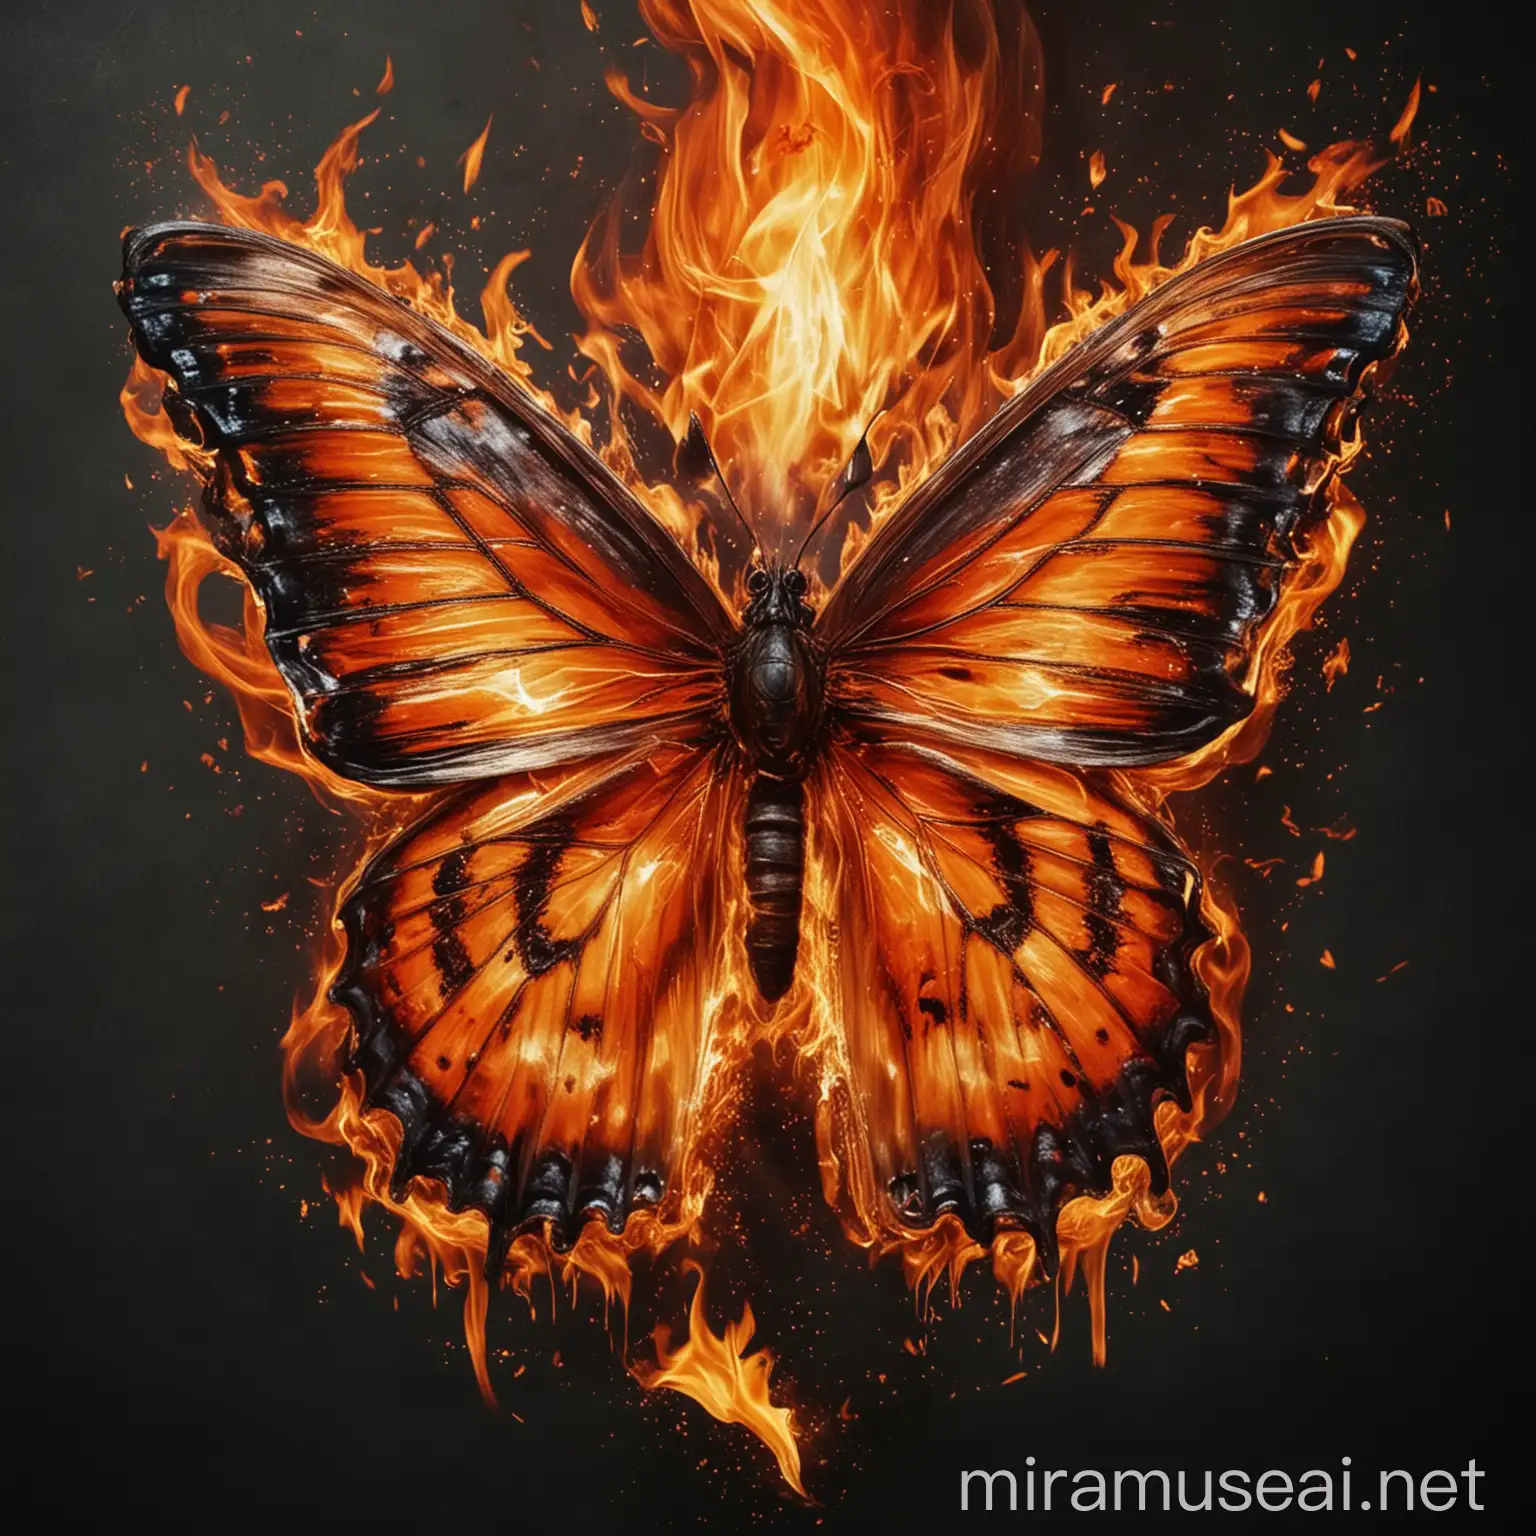 Colorful Butterfly Emerged from Fiery Embers